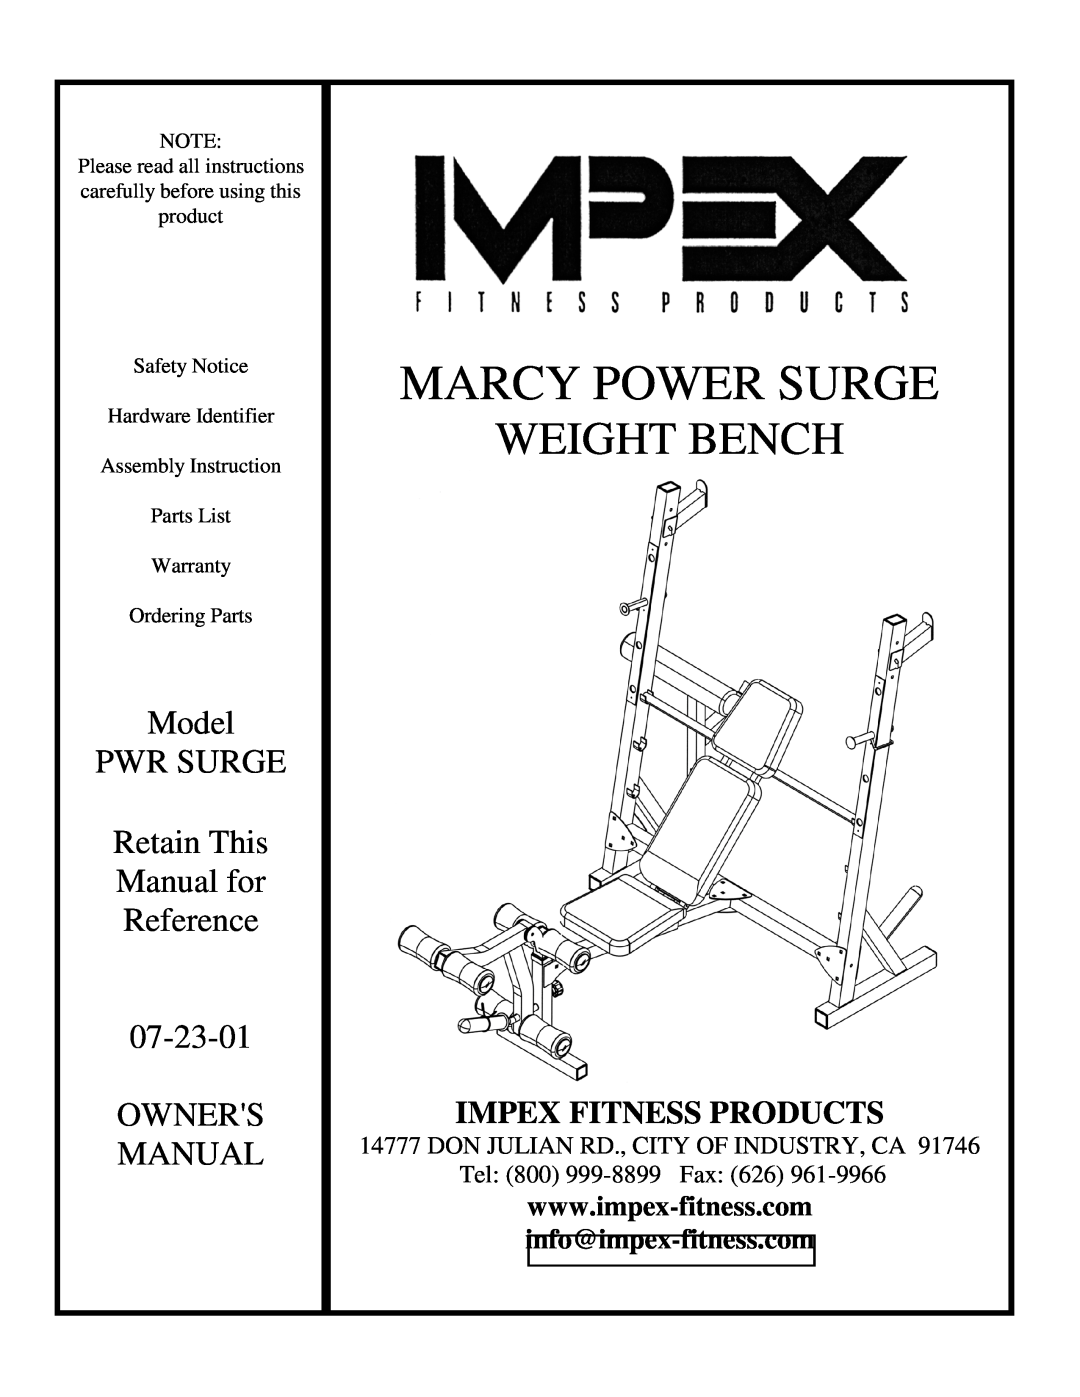 Impex PWR SURGE manual info@impex-fitness.com, Marcy Power Surge, Weight Bench, Model, Pwr Surge, Retain This, Manual for 